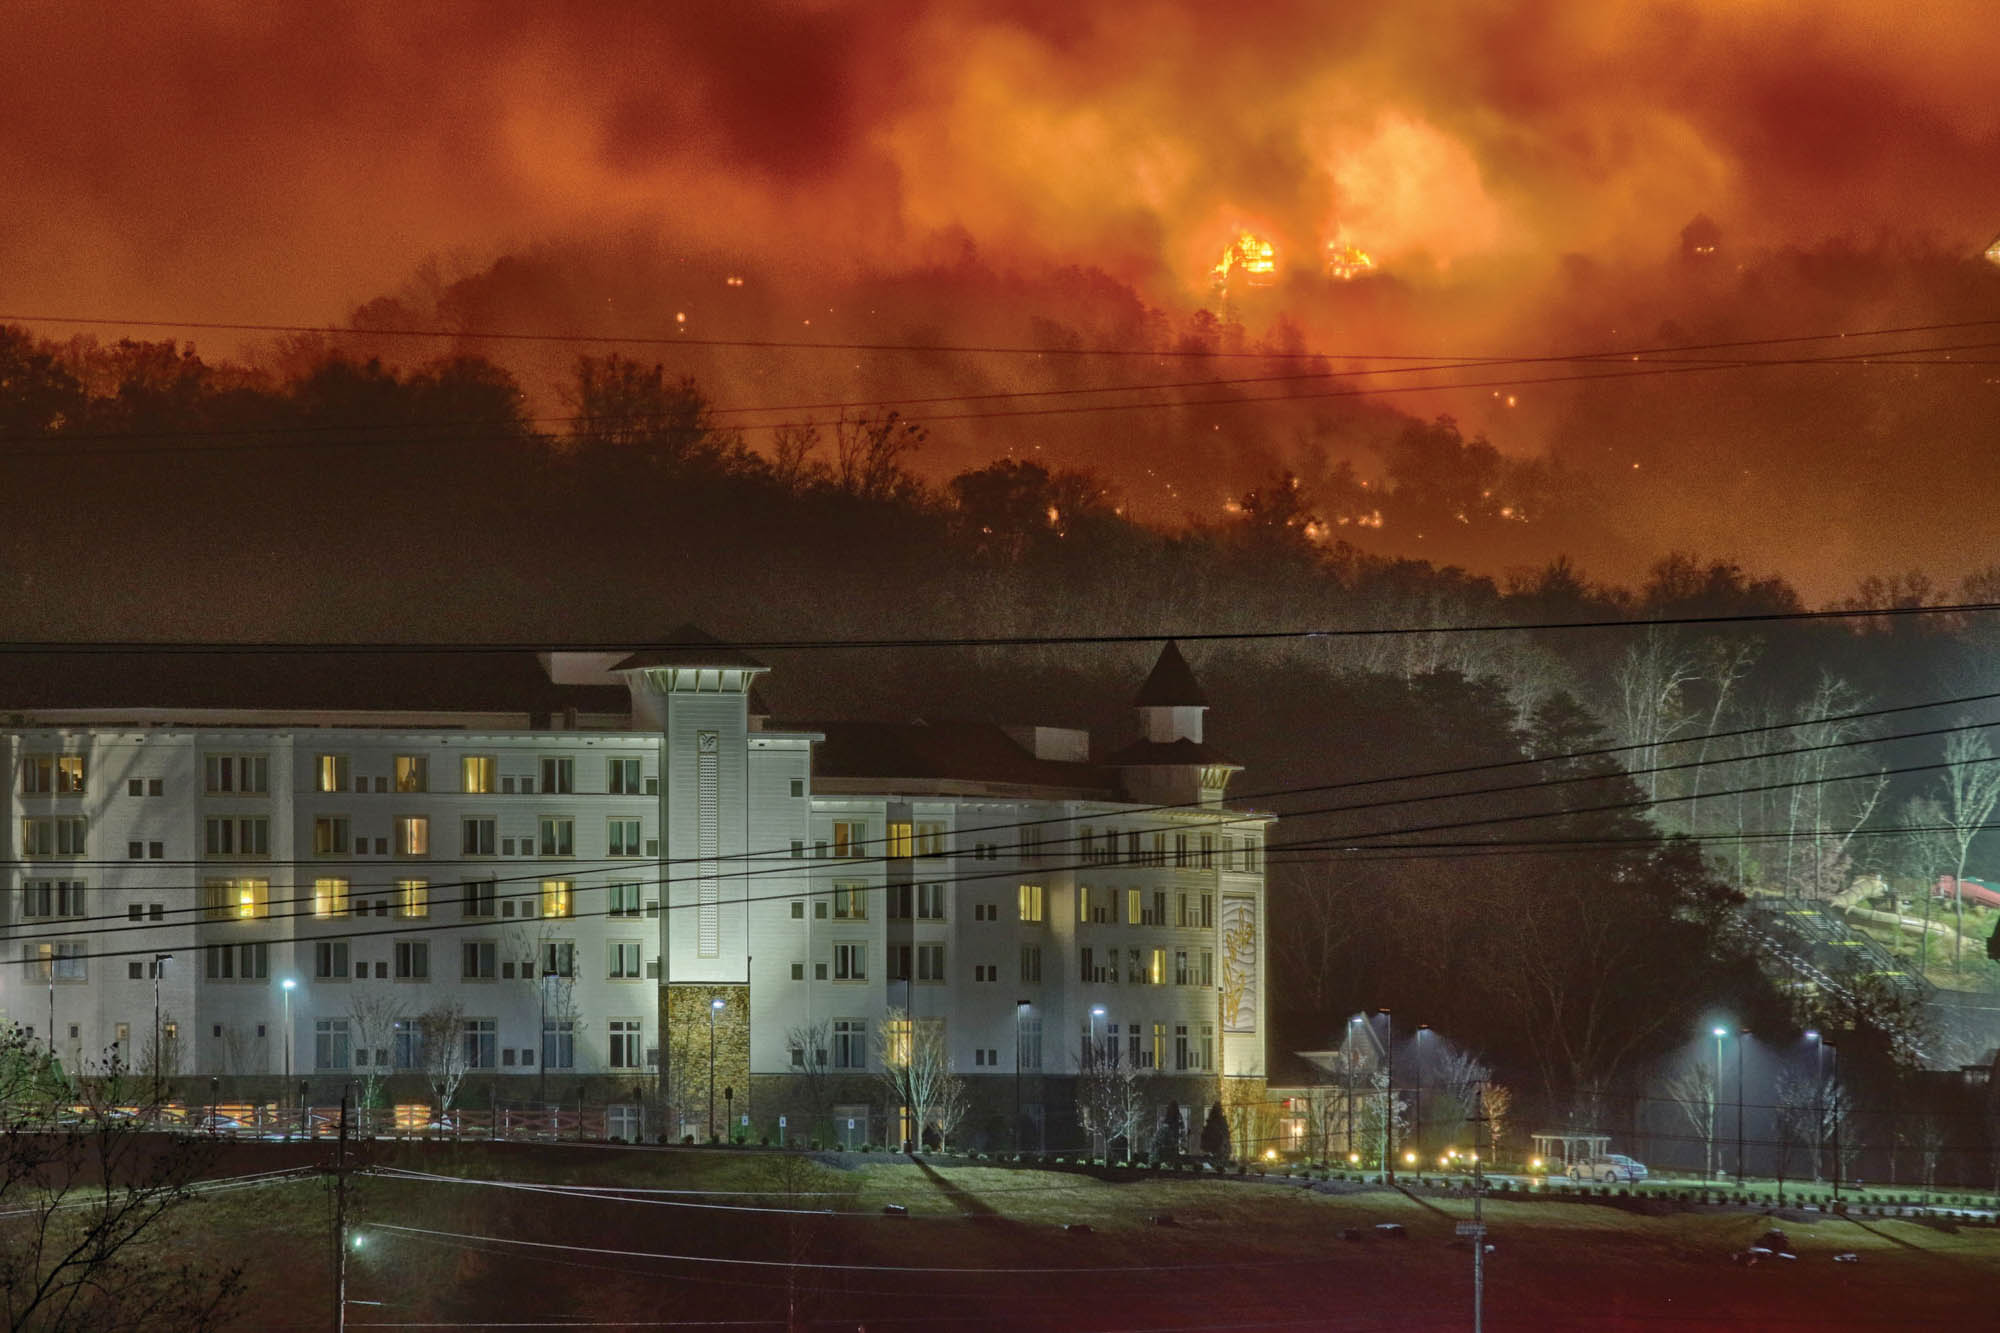 Fire can be seen on a ridge behind Dollywood’s Dreammore Resort in Pigeon Forge.